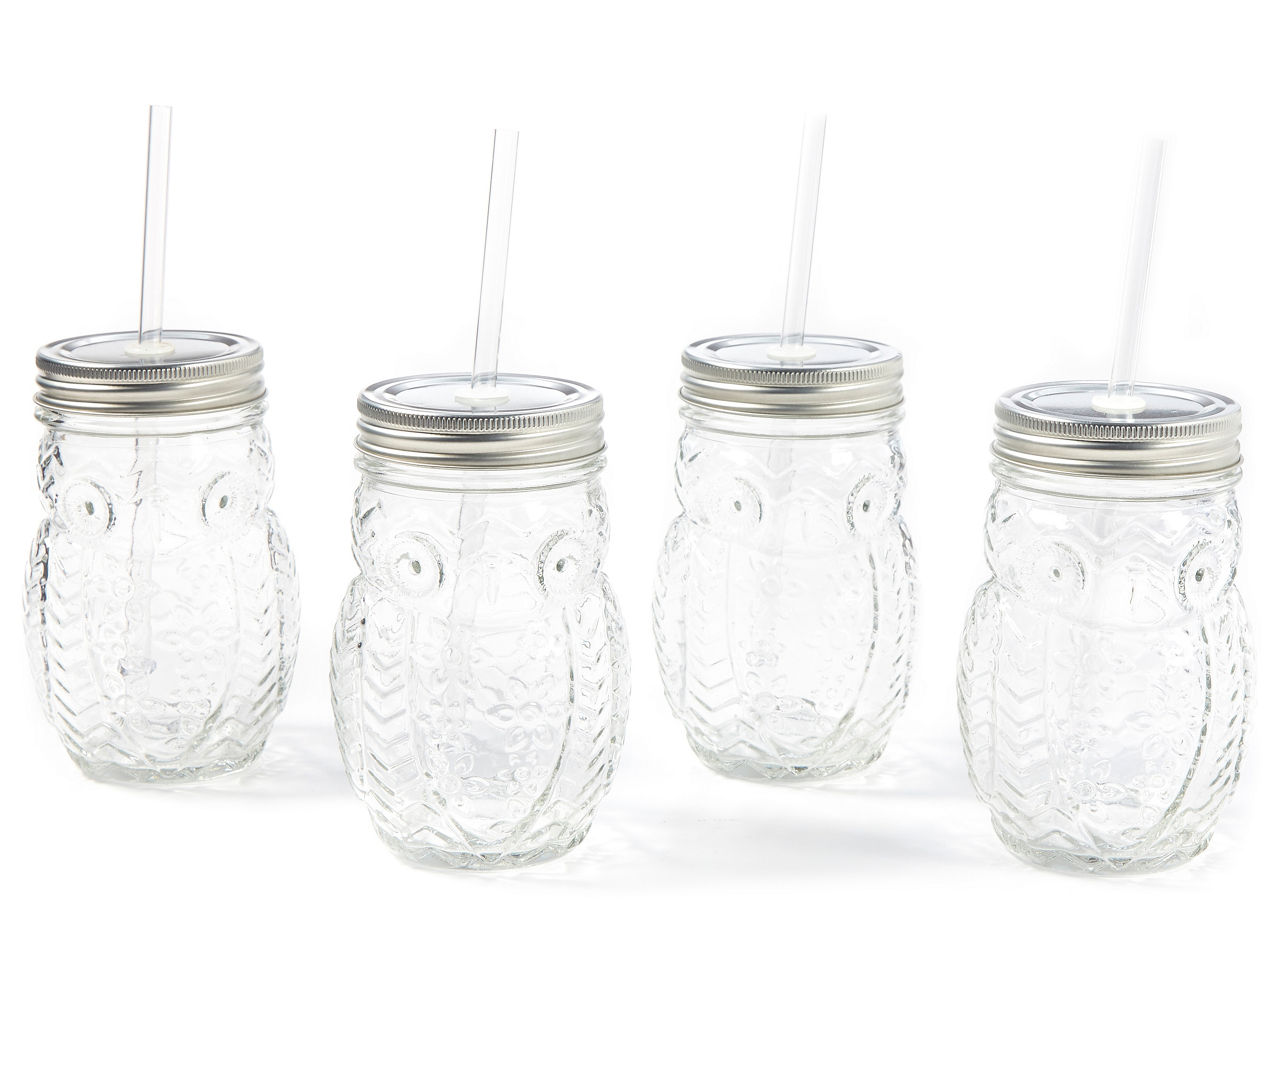 Mainstays Glass Owl Sipper with Straw, Set of 4 